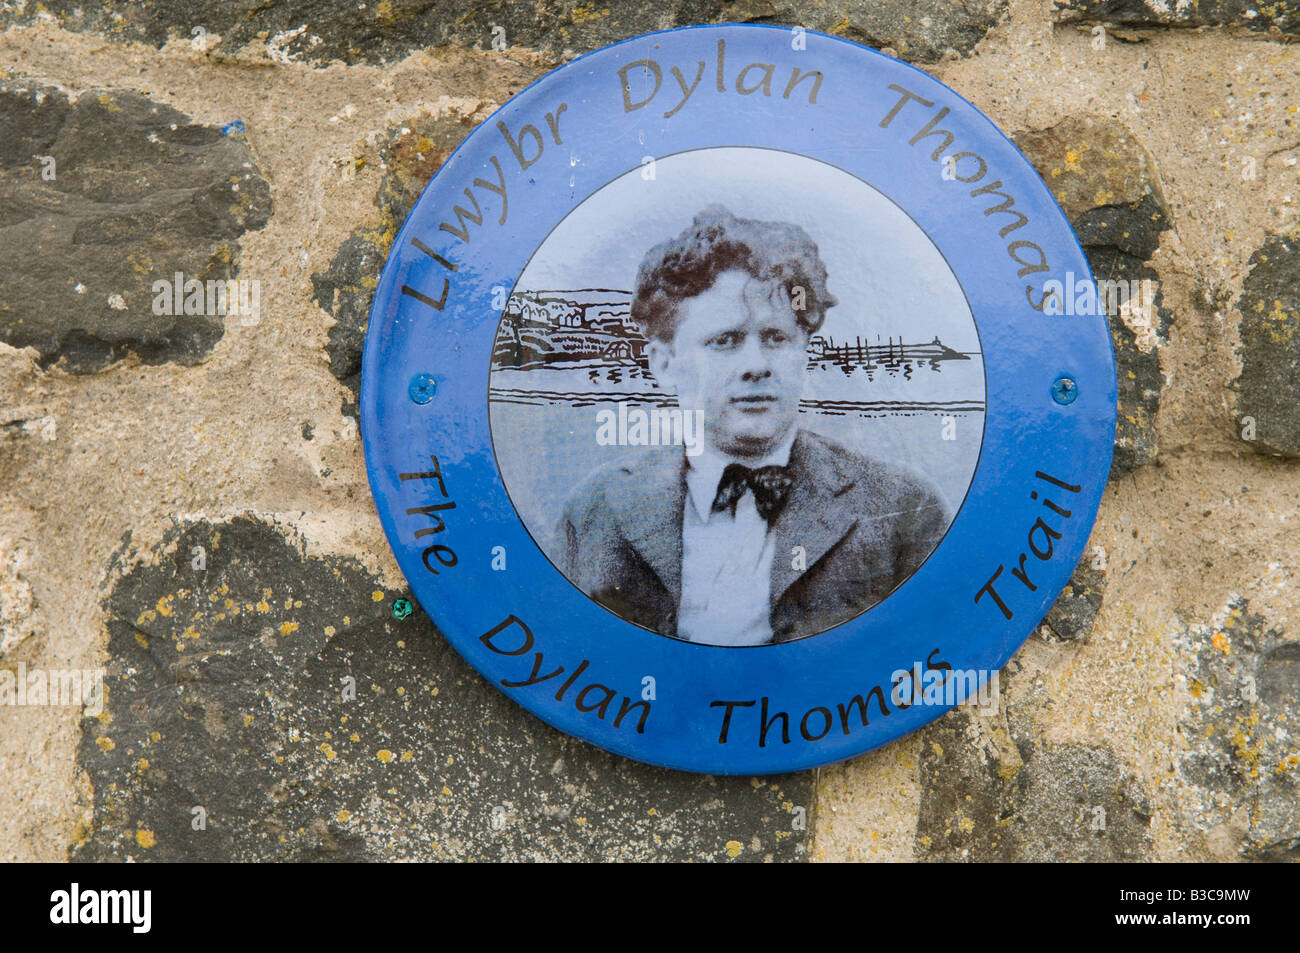 A round Blue wall plaque marking the Dylan Thomas Trail in Aberaeron Ceredigion Wales UK Stock Photo